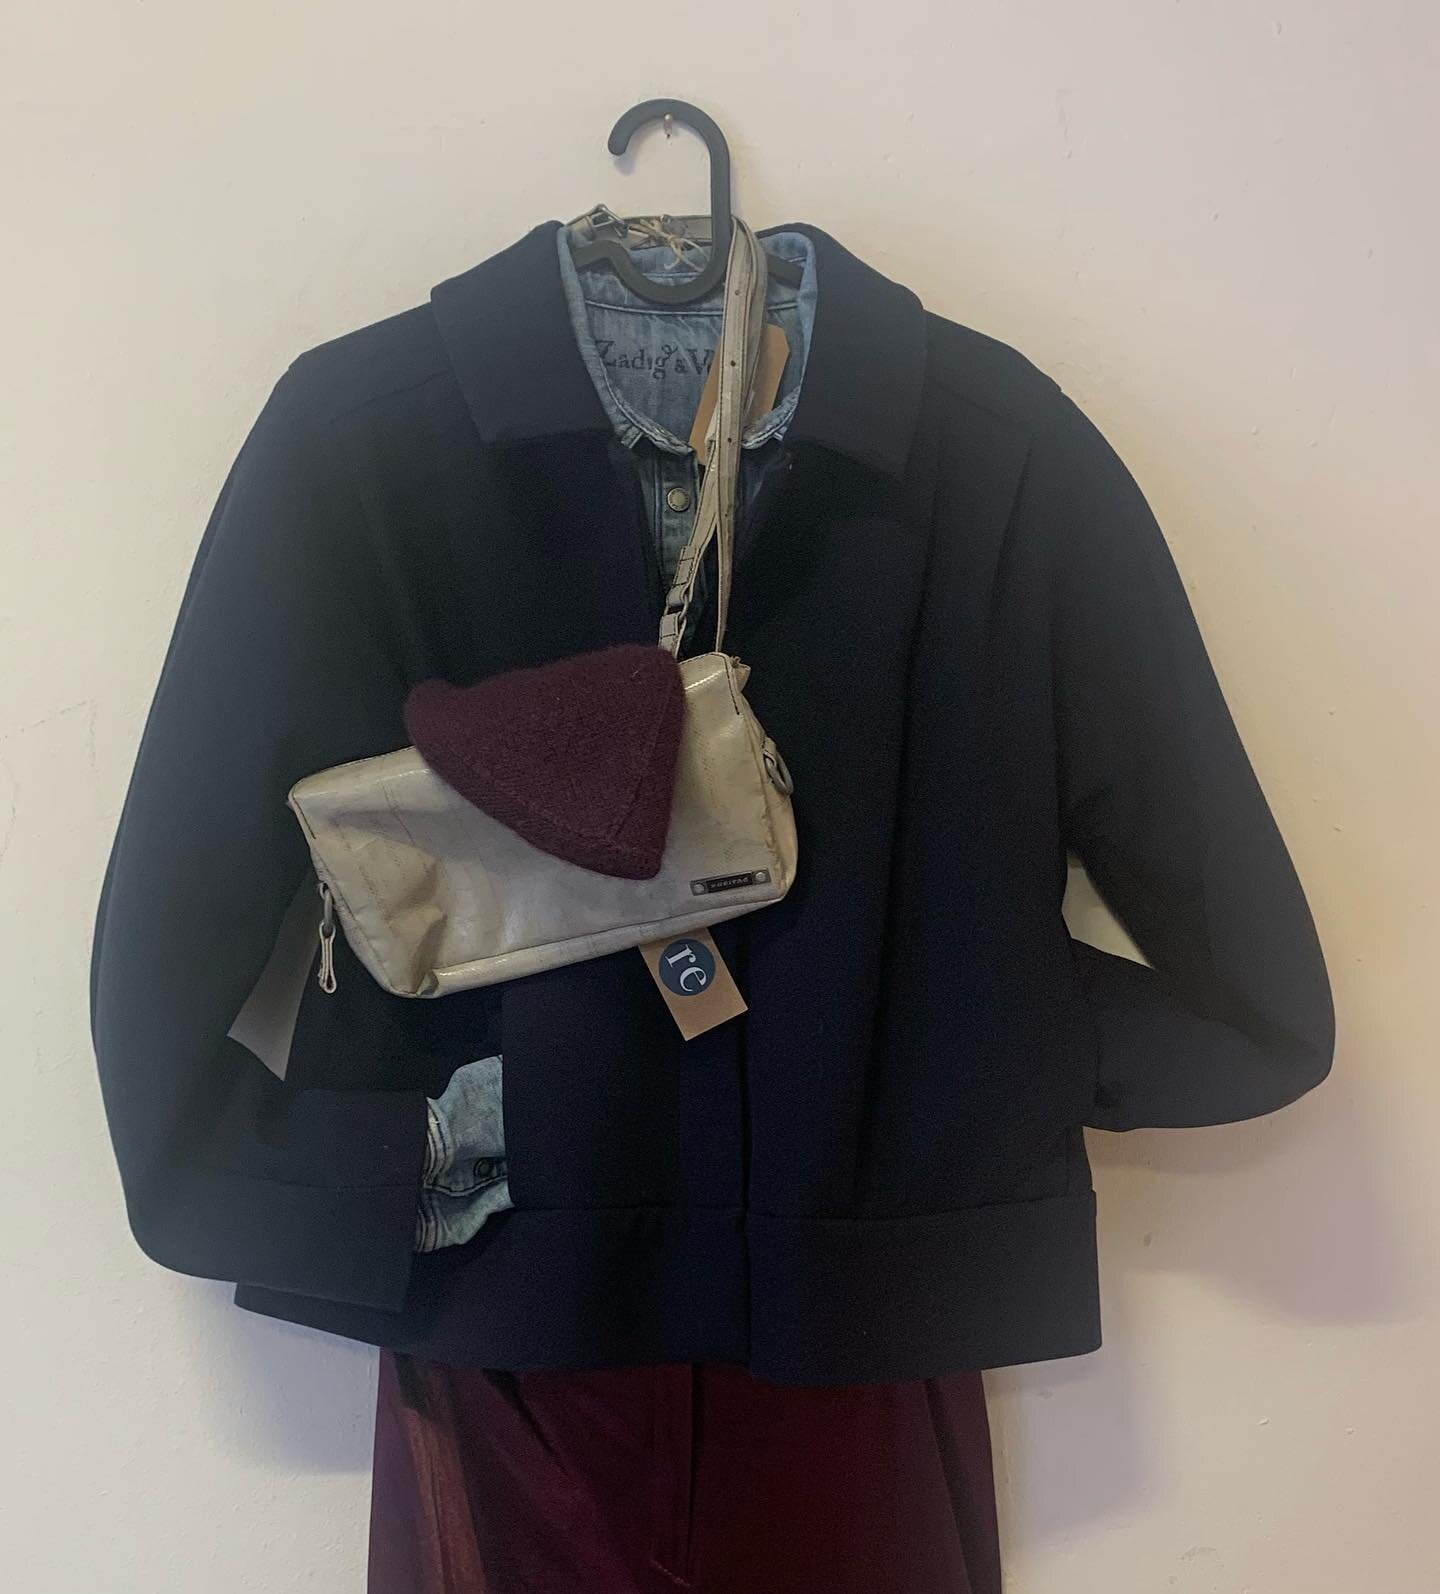 Street Style 😎

Veste COS bleue marine / taille 38 / CHF 74.- 
Chemise Zadig &amp; Voltaire denim / taille S / CHF 124.-
Pantalons Liu Jo  bordeaux / CHF 49.- 
Chaussures / Opening Ceremony  silver / taille 39 / CHF 69.- 
Sac Freitag gris / CHF 79.-